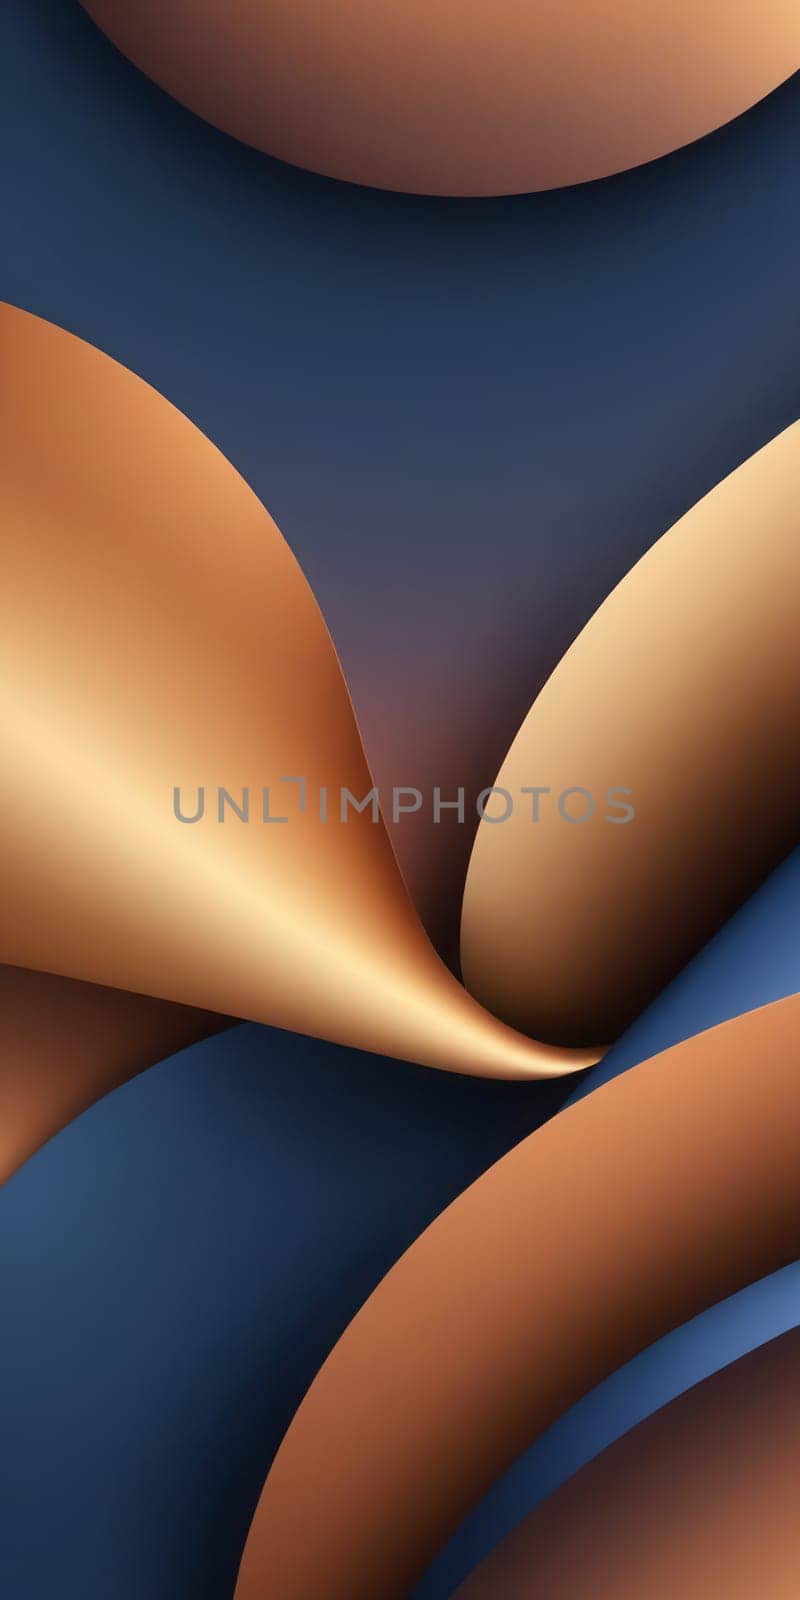 Ellipsoidal Shapes in Navy and Brown by nkotlyar